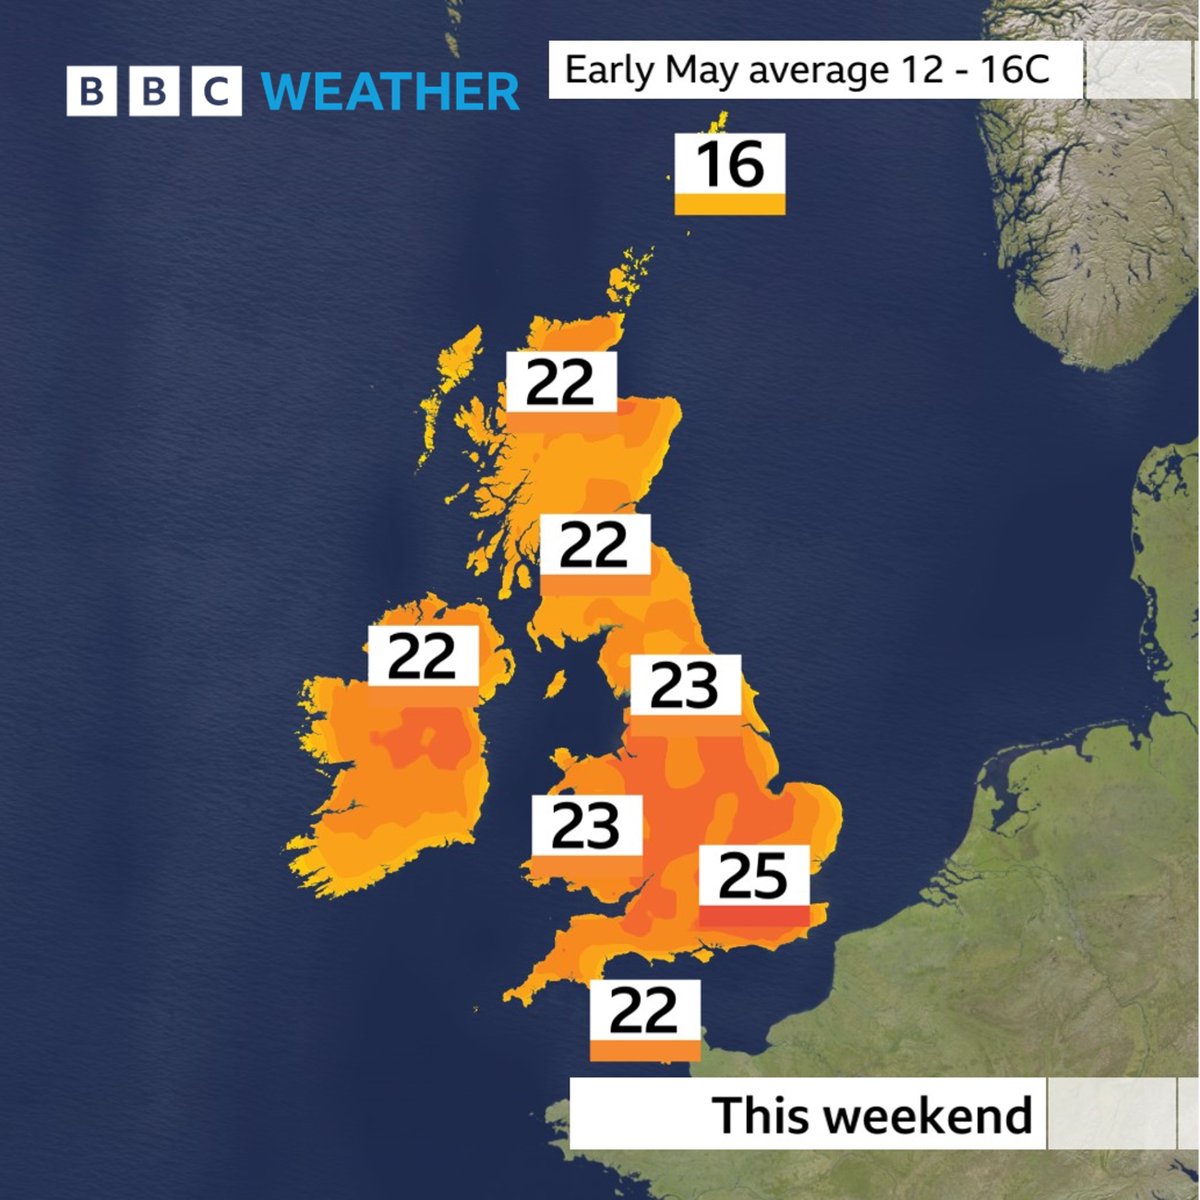 Sun and warmth becoming more widespread over the next few days 🌤️

Temperatures peak this weekend, 4-9C above normal for early May.

Saturday the driest/sunniest day. Showers/thunderstorms developing on Sunday.